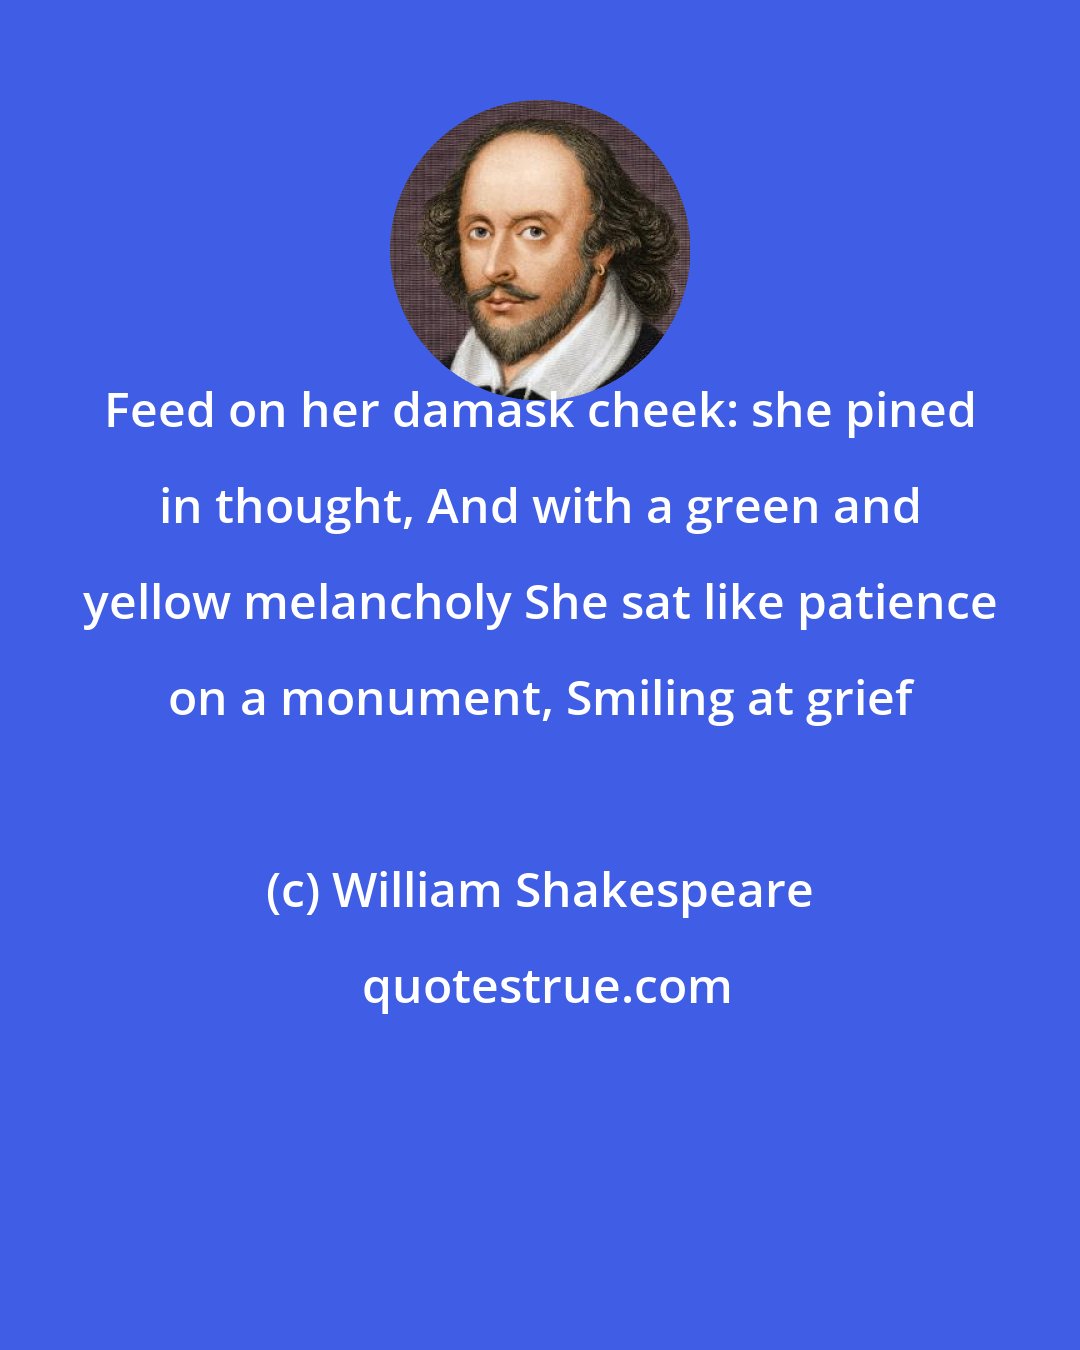 William Shakespeare: Feed on her damask cheek: she pined in thought, And with a green and yellow melancholy She sat like patience on a monument, Smiling at grief